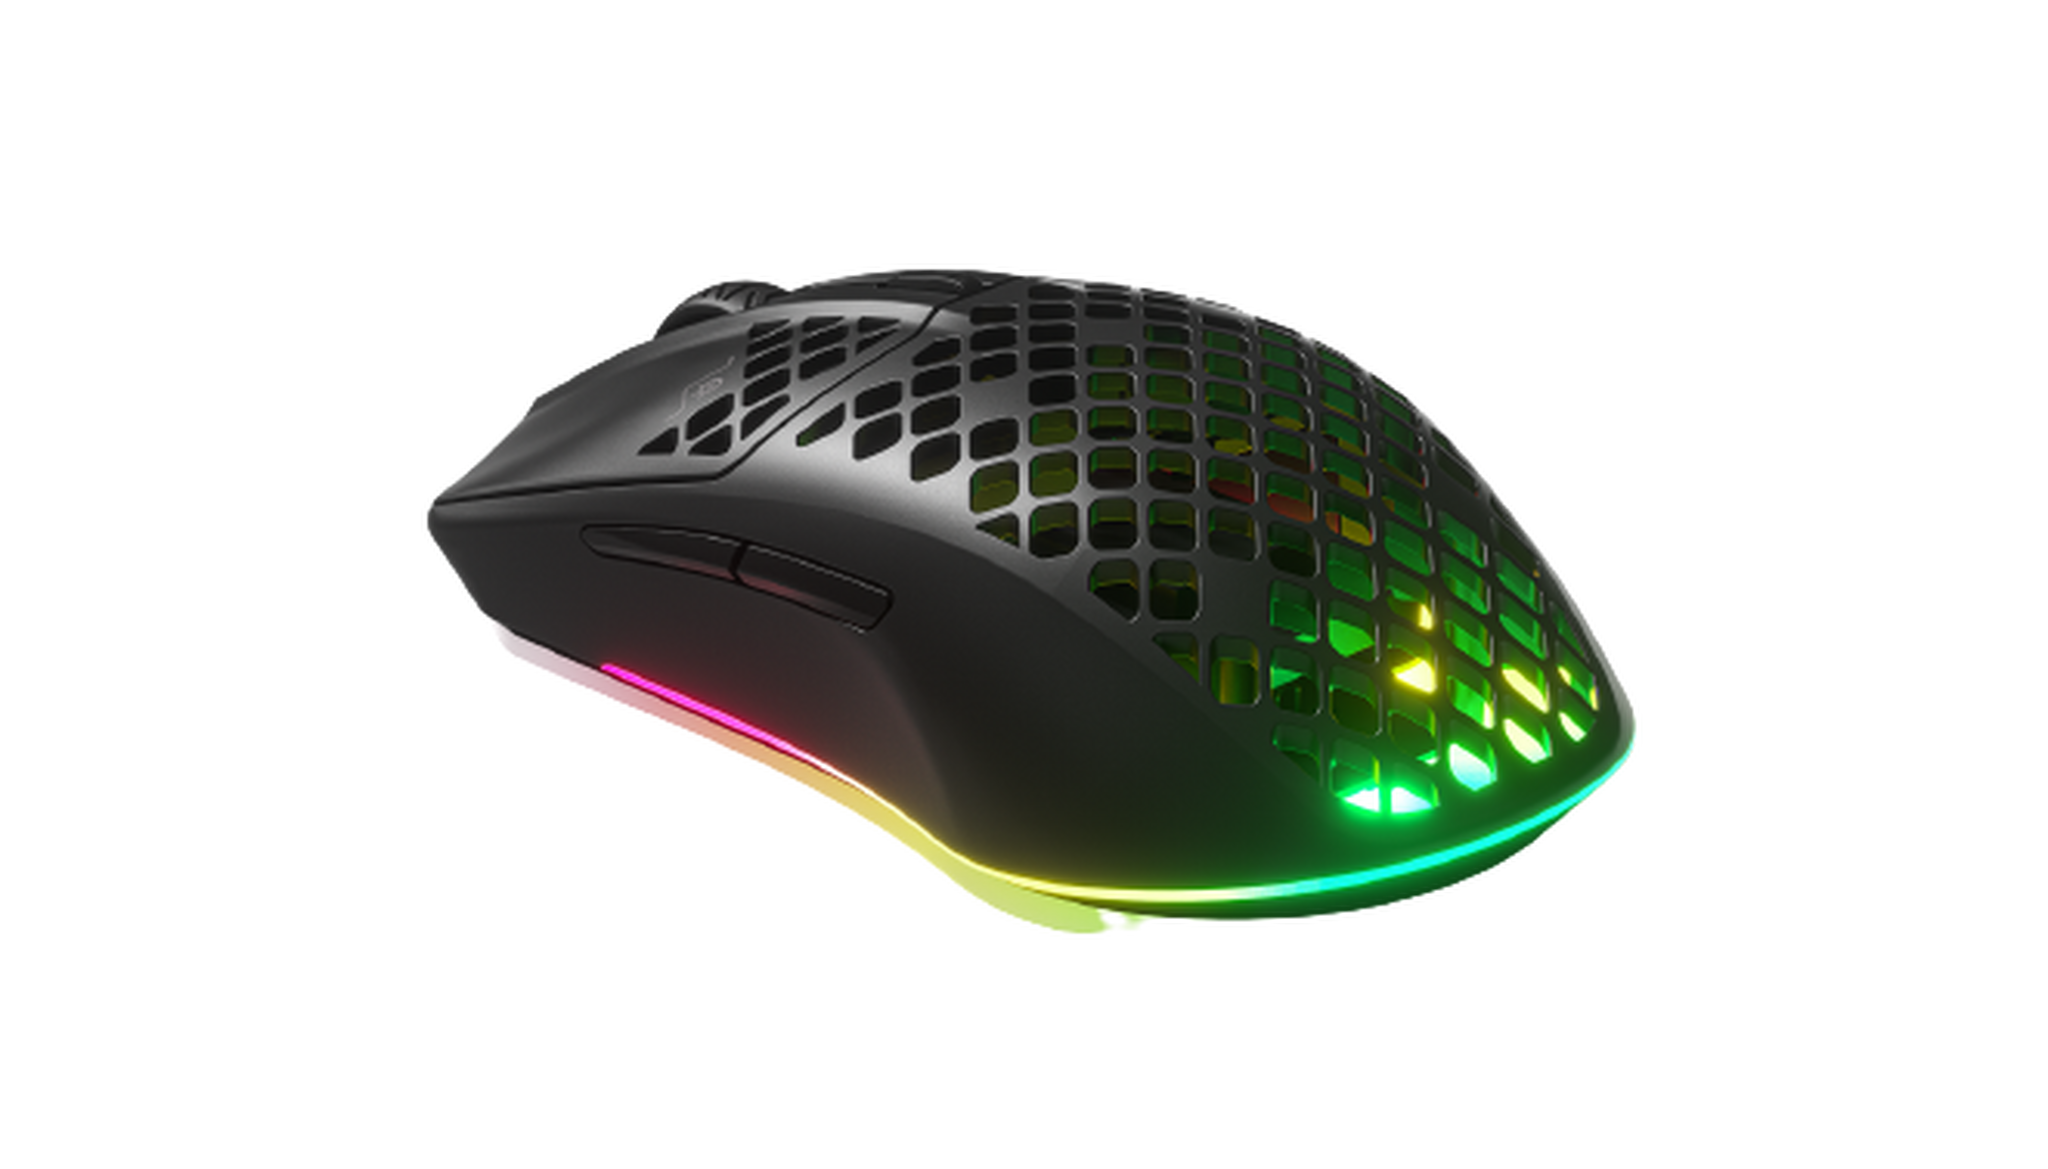 Steelseries Aerox 3 Wireless Gaming Mouse